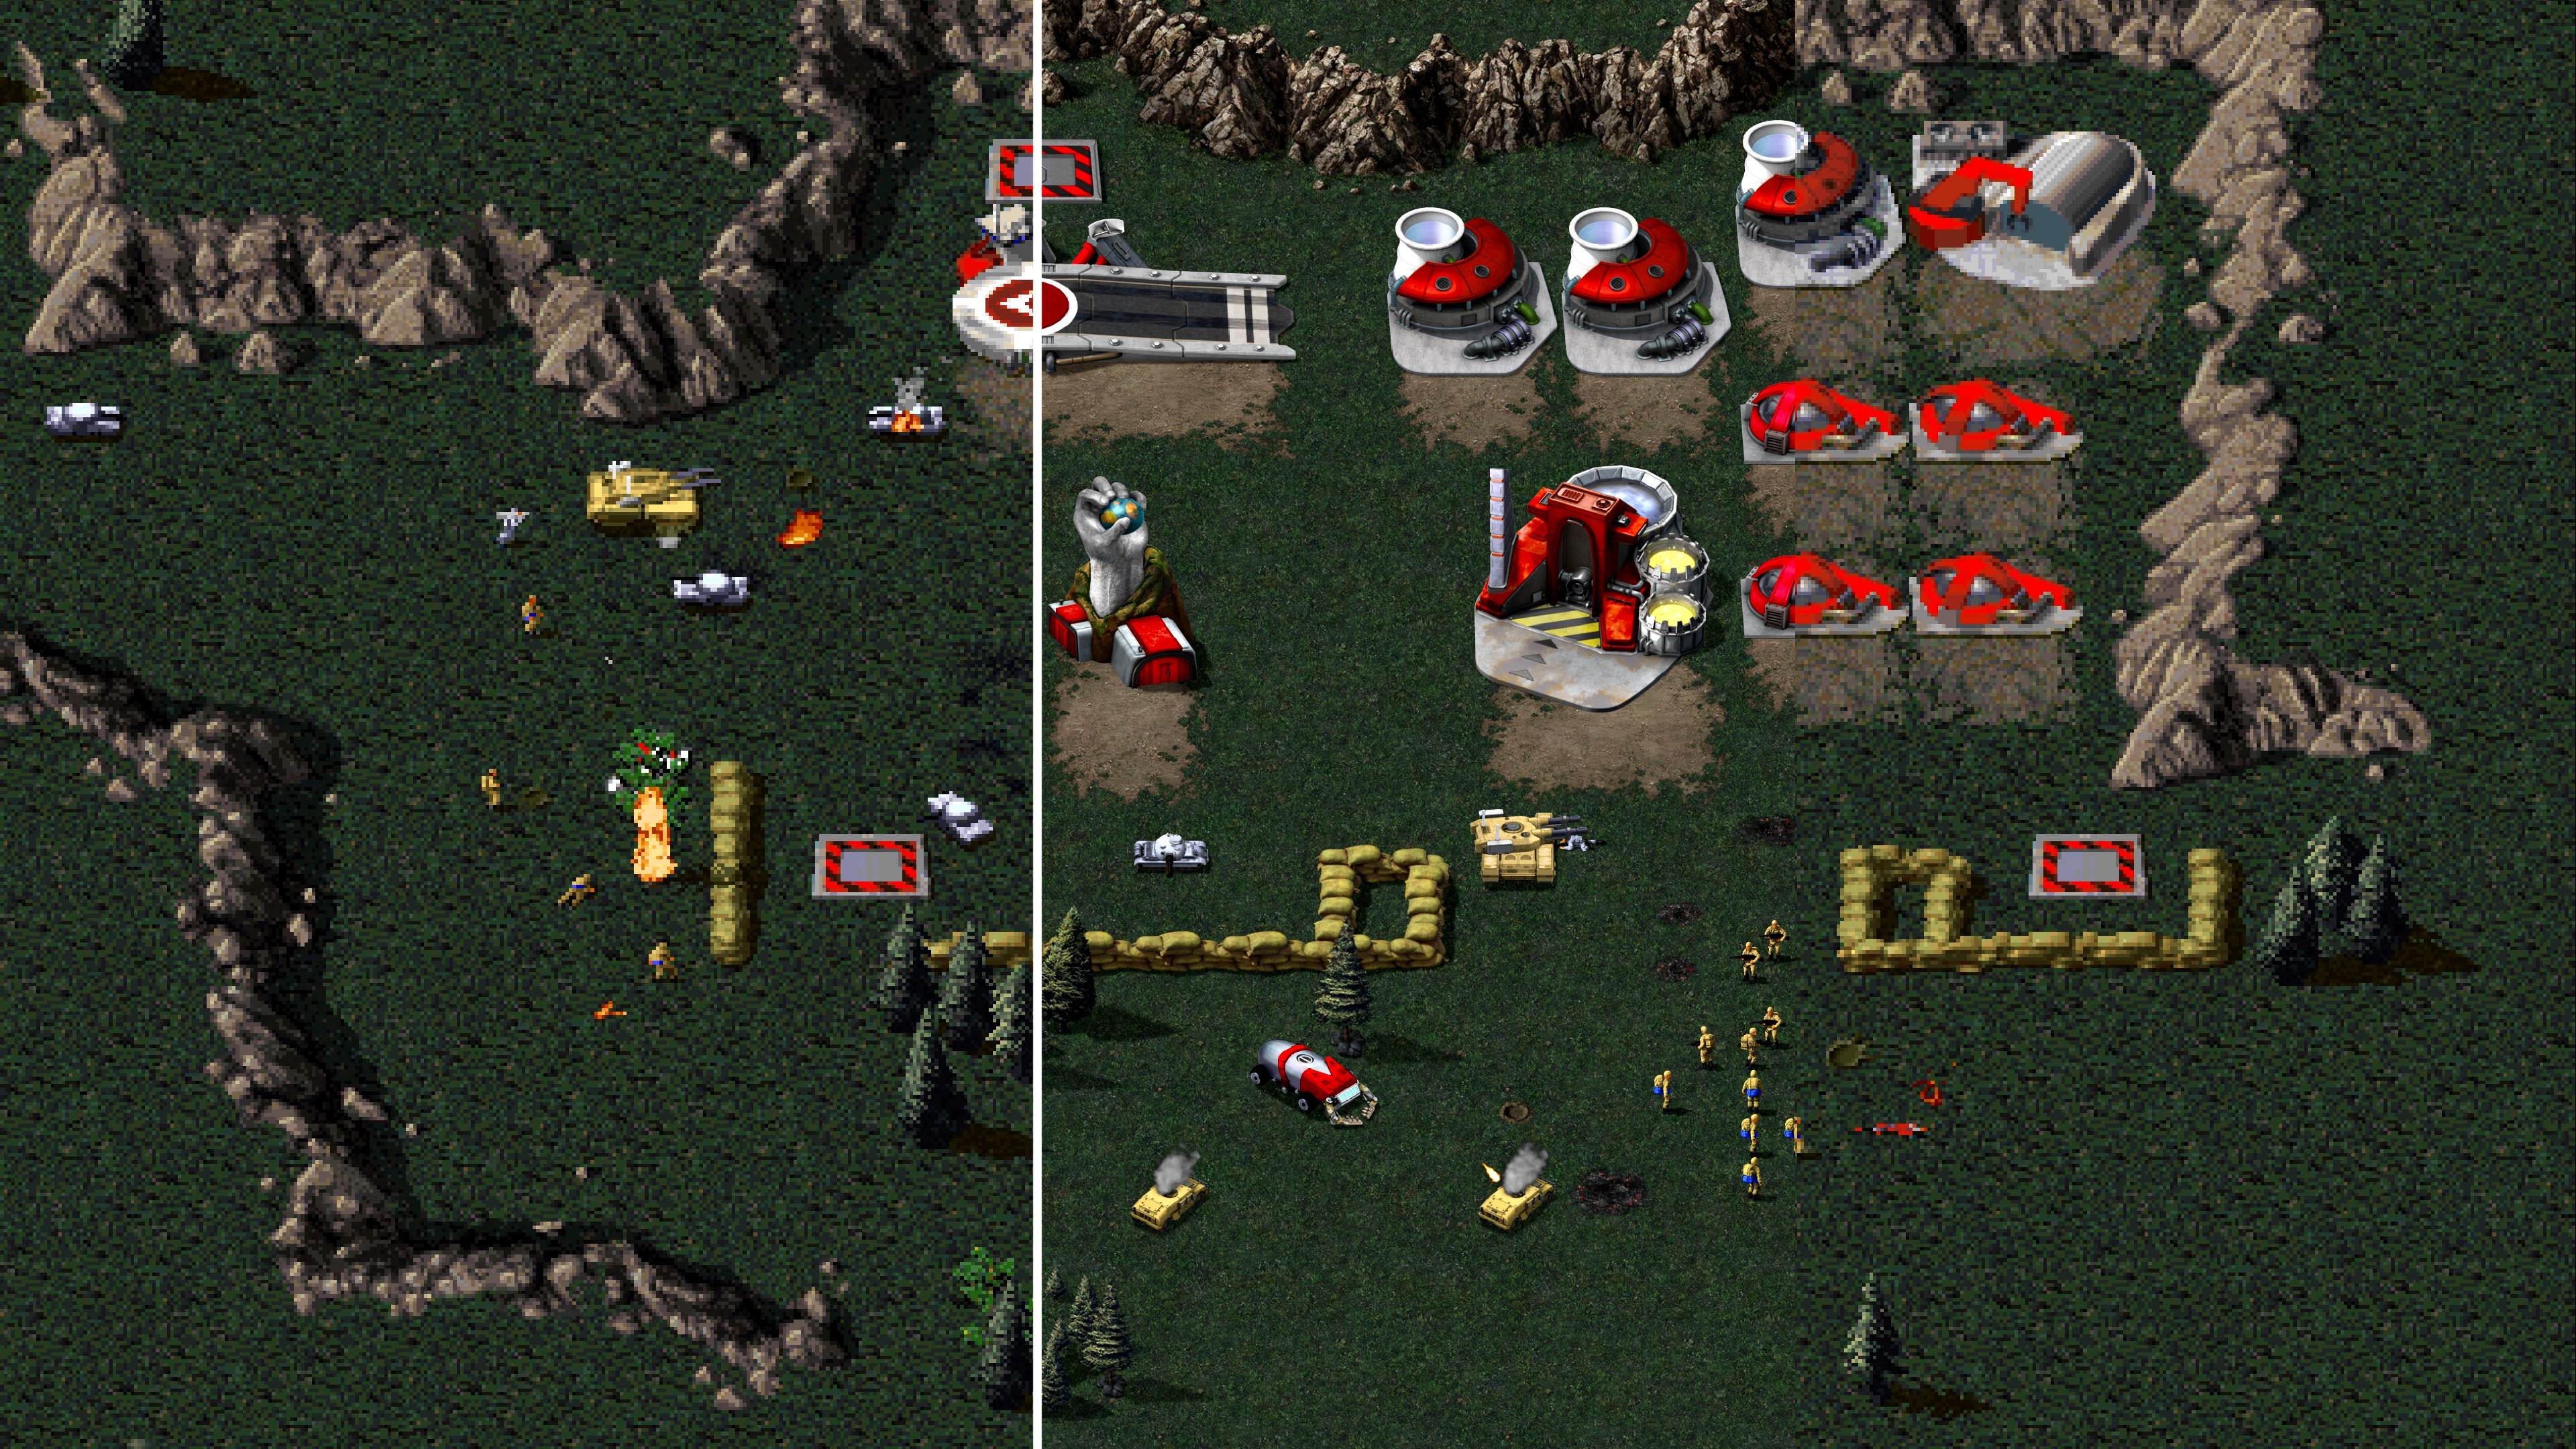 Command Conquer Remastered collection 2020. Command and Conquer 1995 Remaster. Command Conquer Tiberian Dawn Remastered. CNC Remastered collection.